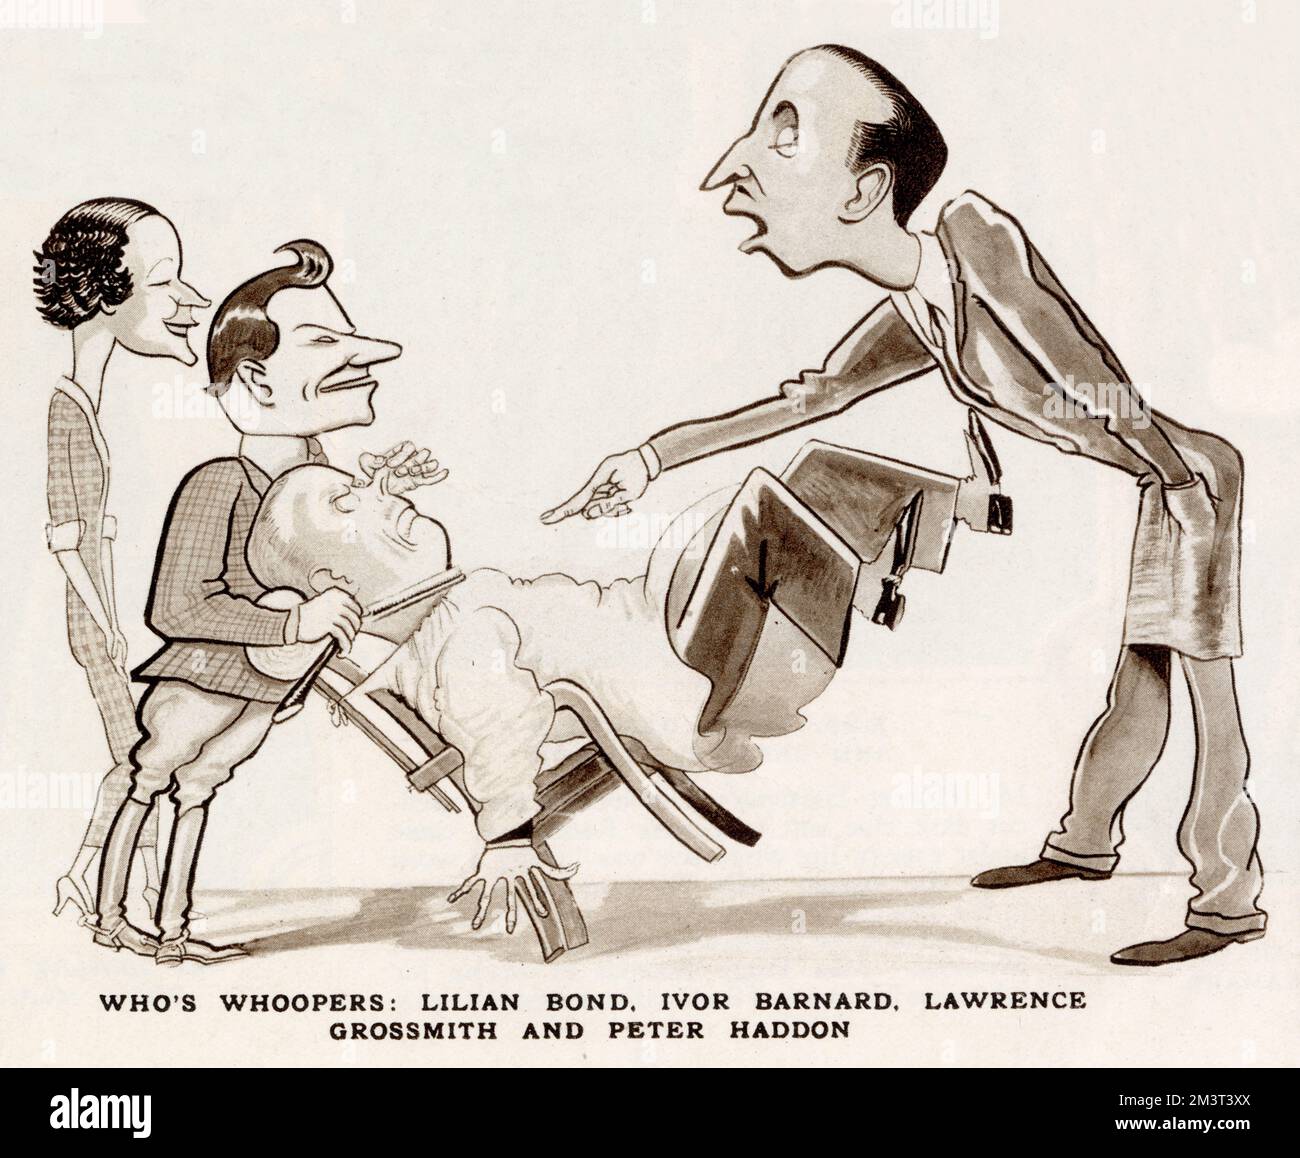 Lilian Bond, Ivor Barnard, Lawrence Grossmith and Peter Haddon caricatured by Tom Titt in The Tatler in a scene from 'Who's Who' by P. G. Wodehouse at the Duke of York's Theatre. Stock Photo